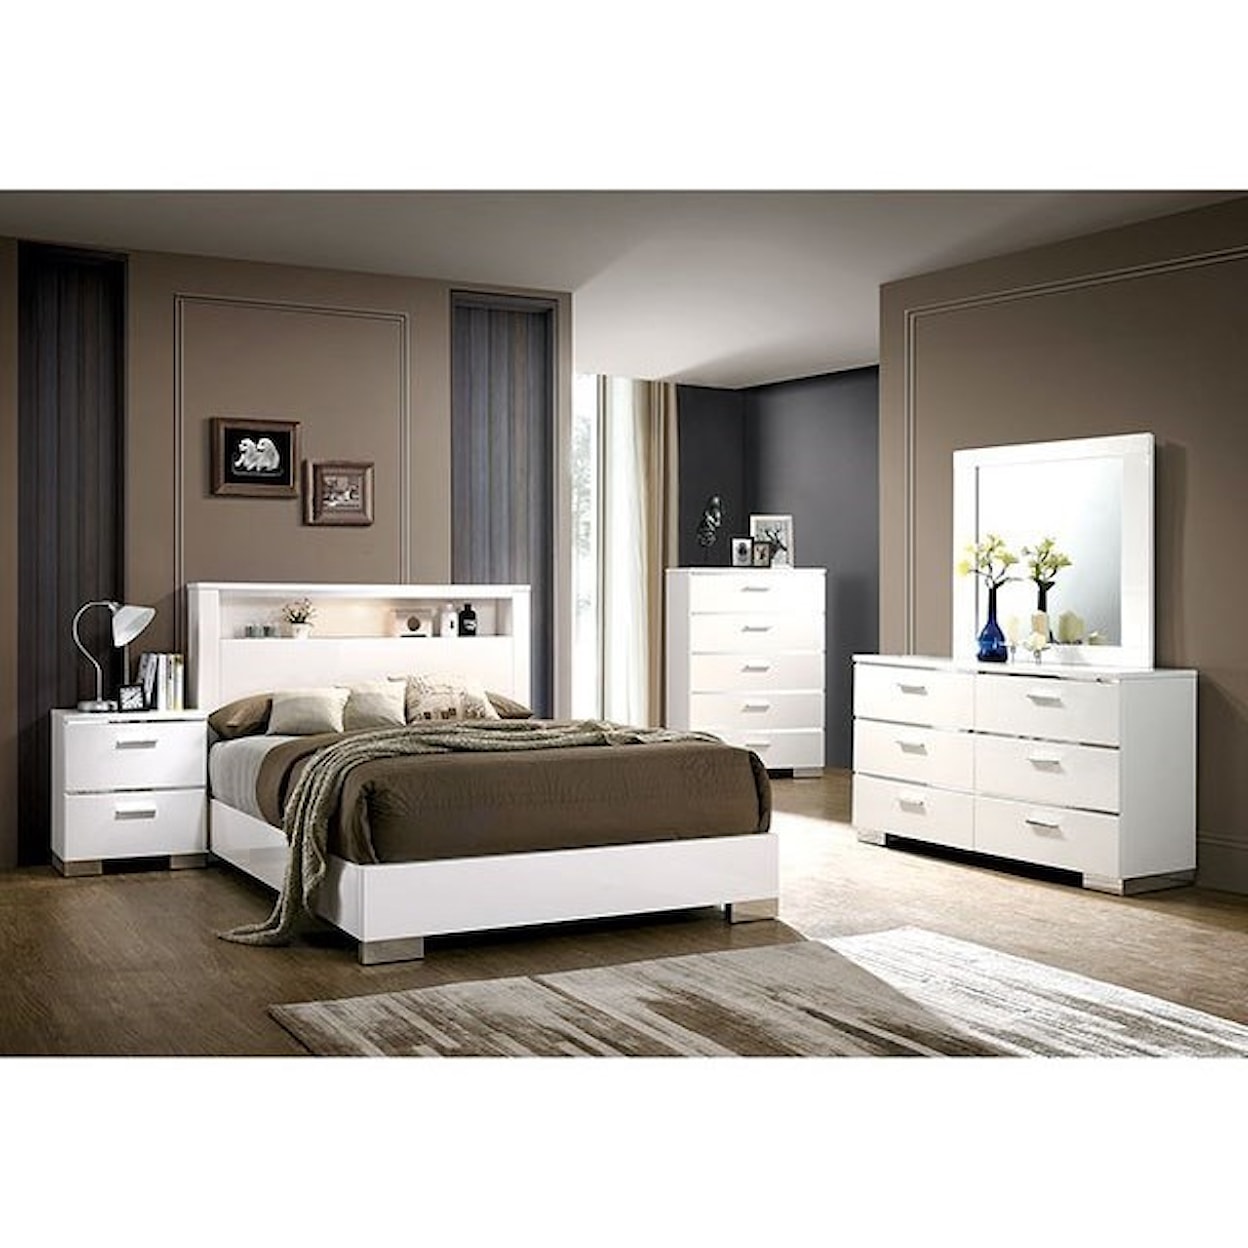 Furniture of America Malte Chest of Drawers